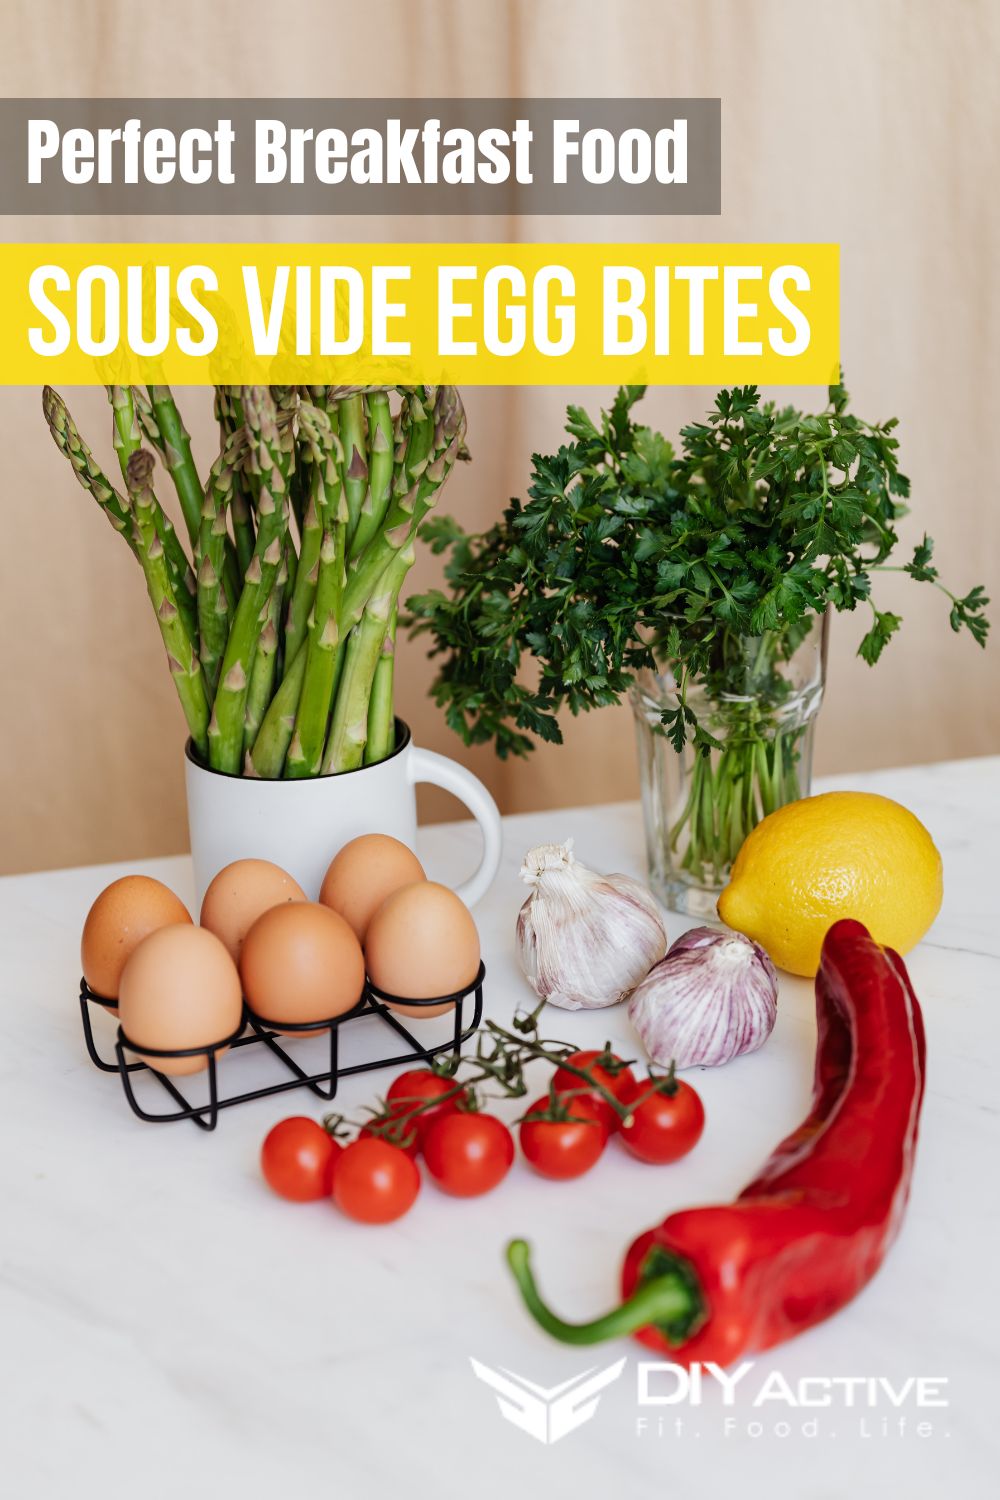 Sous Vide Egg Bites Might Be the Perfect Breakfast Food